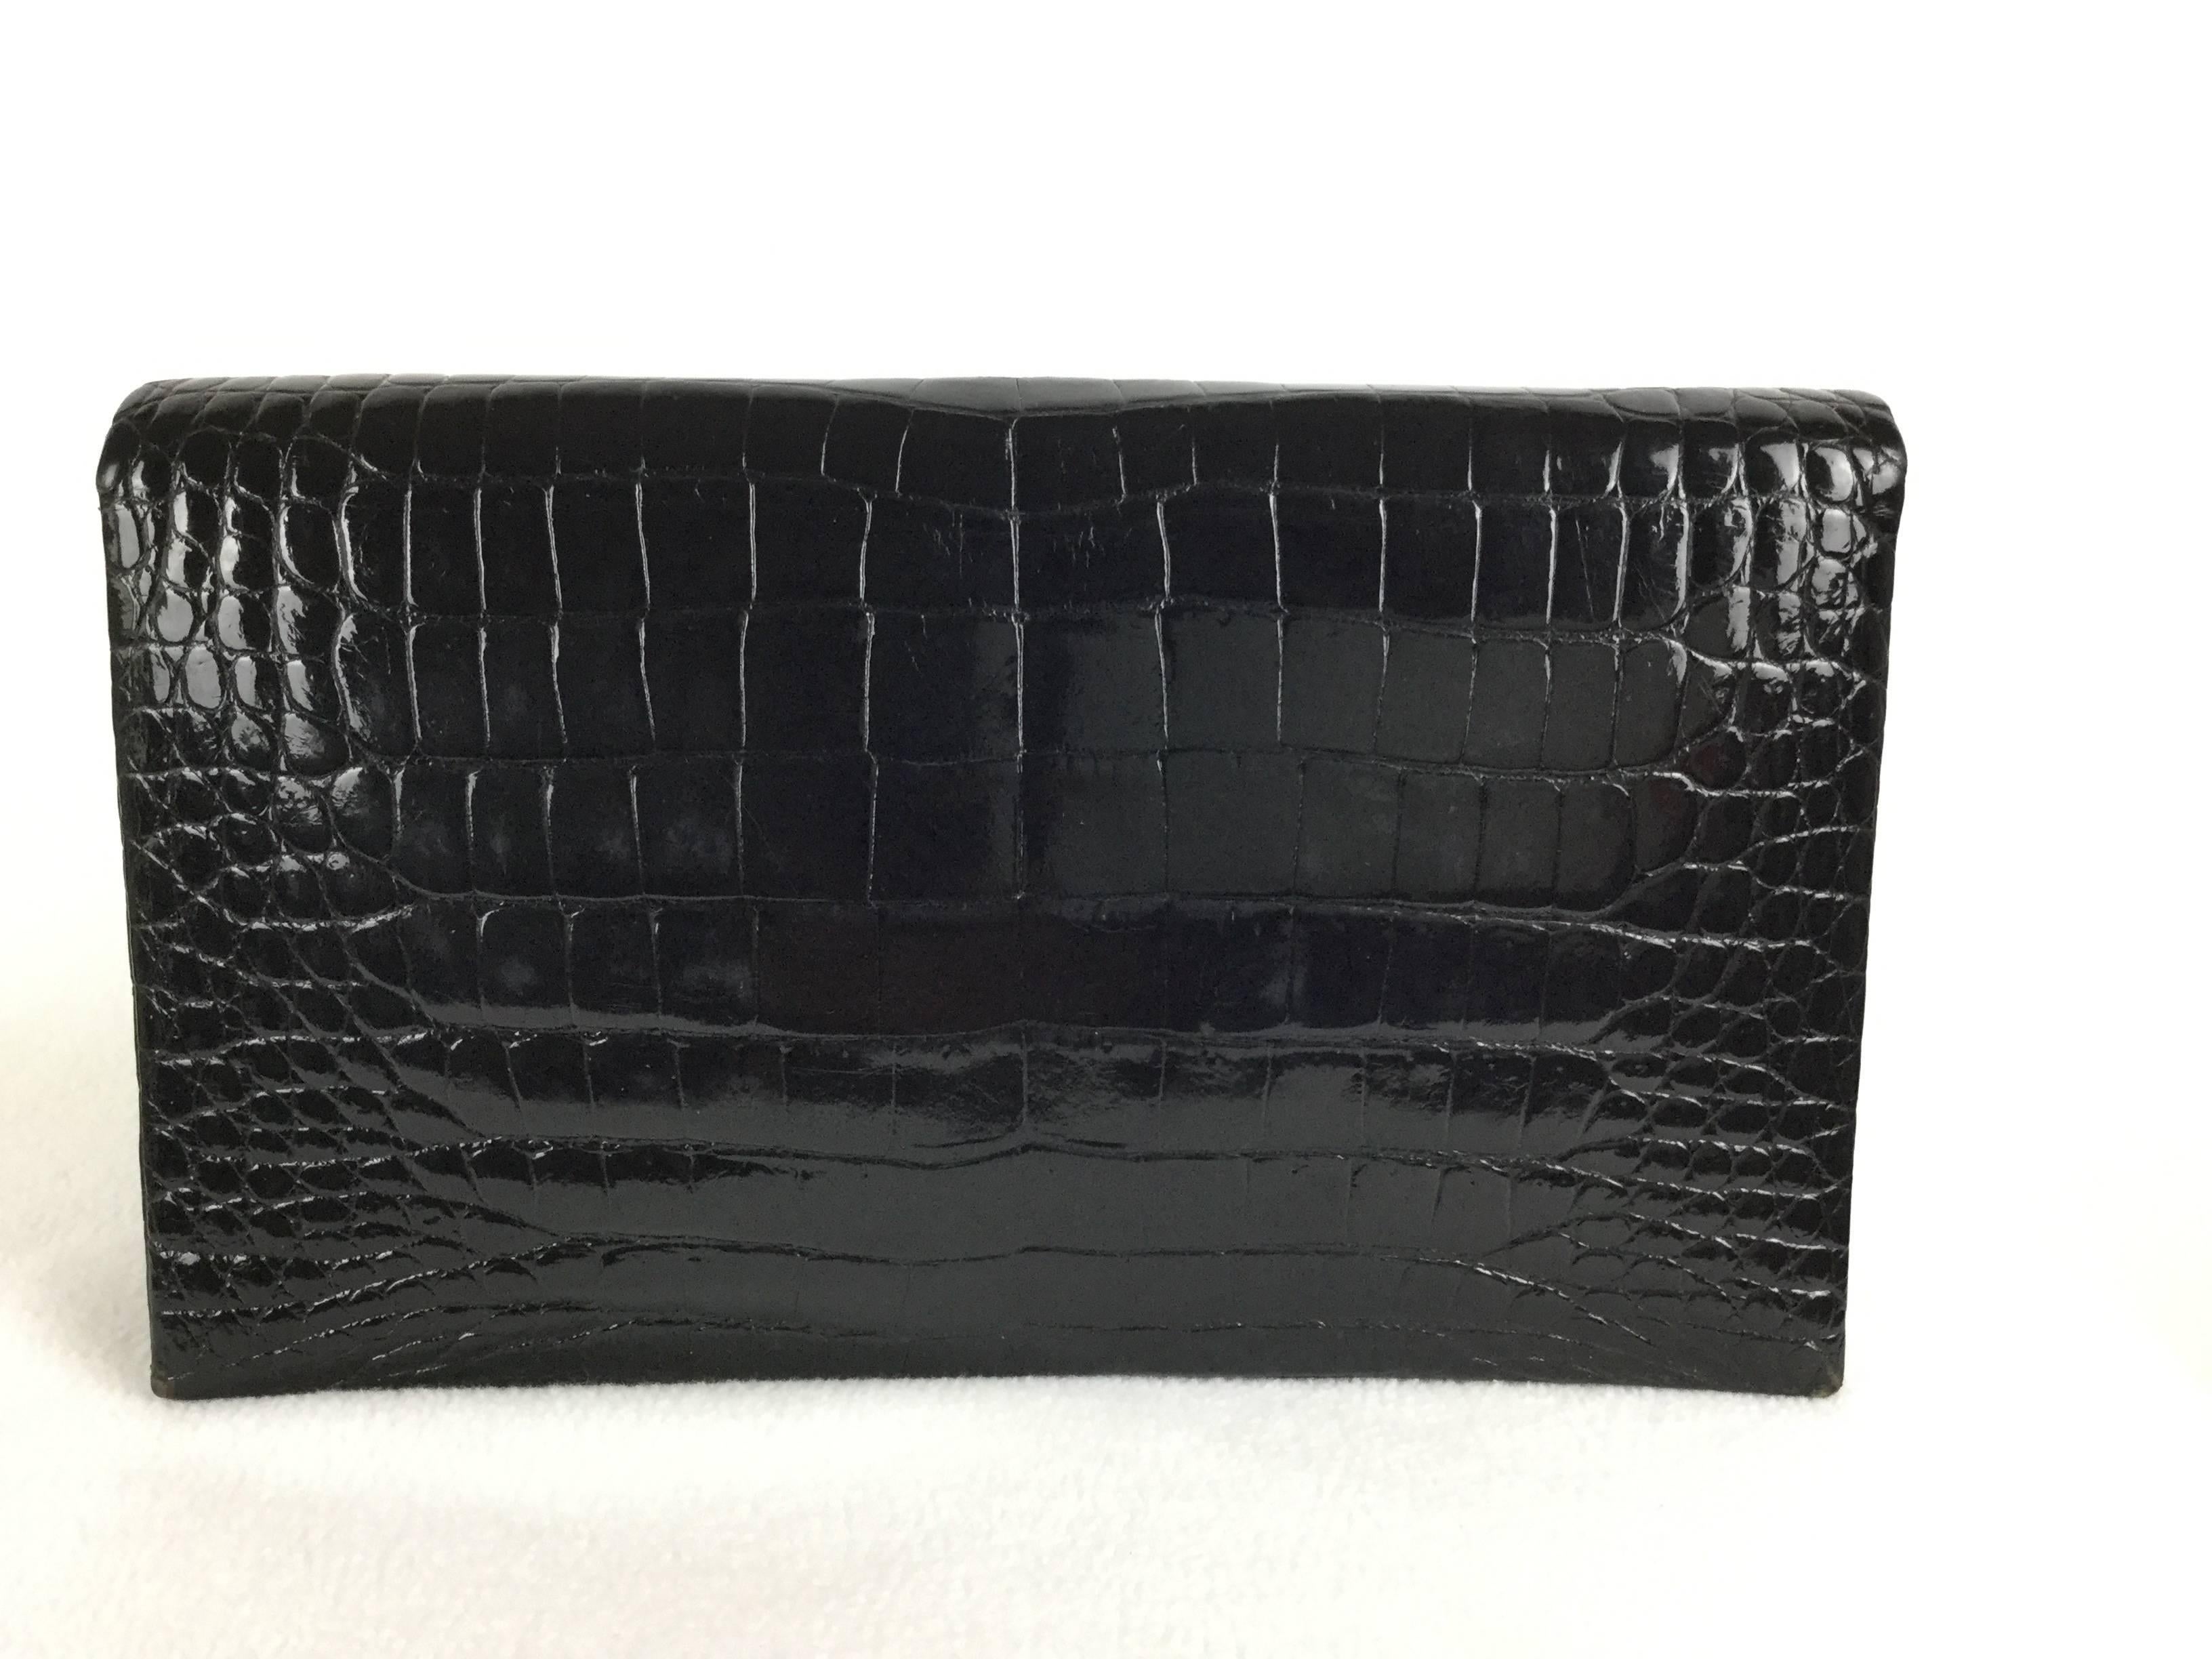 

What an amazing Deco Revival, early 1970's, convertible clutch/shoulder bag in sleek black crocodile with enamel trim and a subtle but colorful floral focus enlivened by marcasites.

The Deco-Style enamel clasp is just gorgeous against the